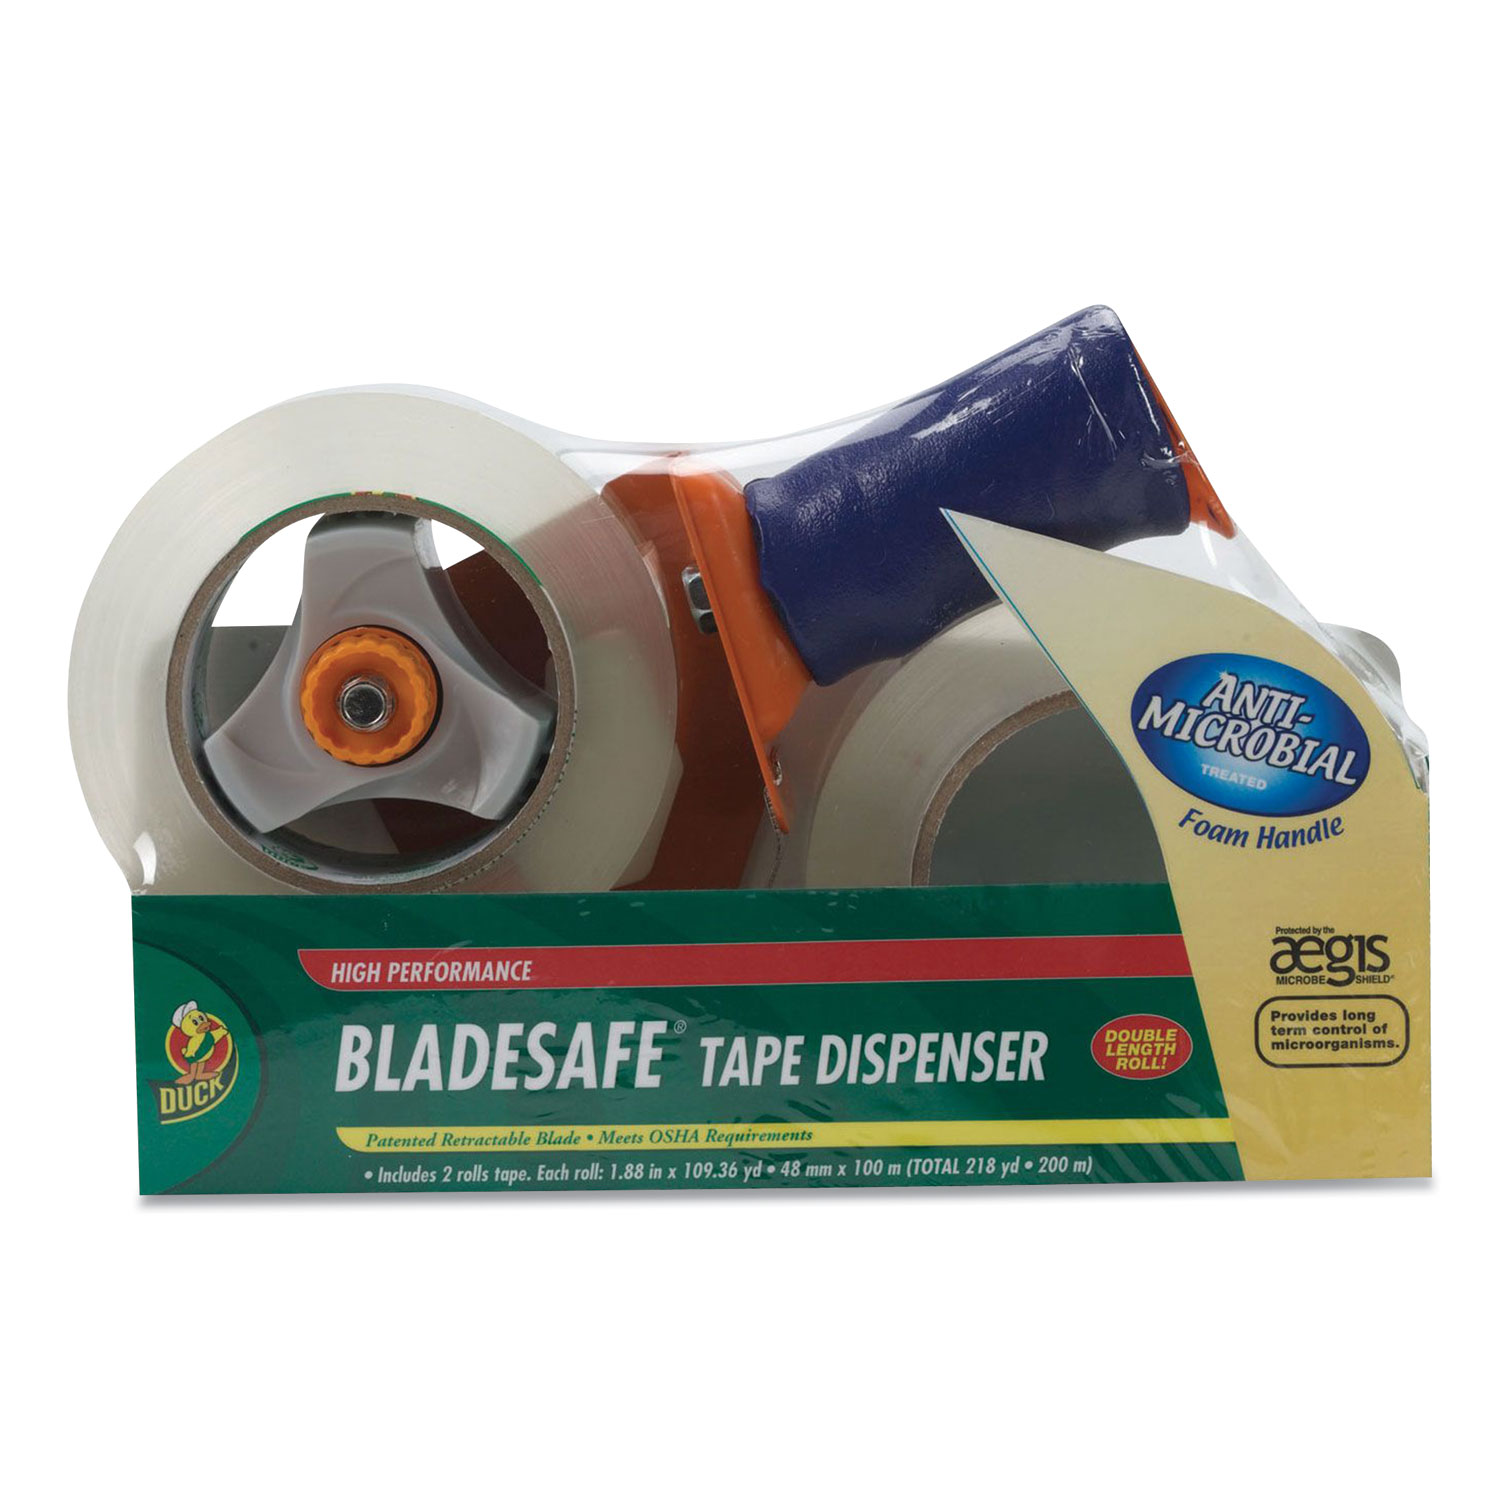  Duck 926458 HP260 Packaging Tape with Bladesafe Pistol-Grip Dispenser, 3 Core, 1.88 x 109.36 yds, Clear, 2/Pack (DUC446574) 